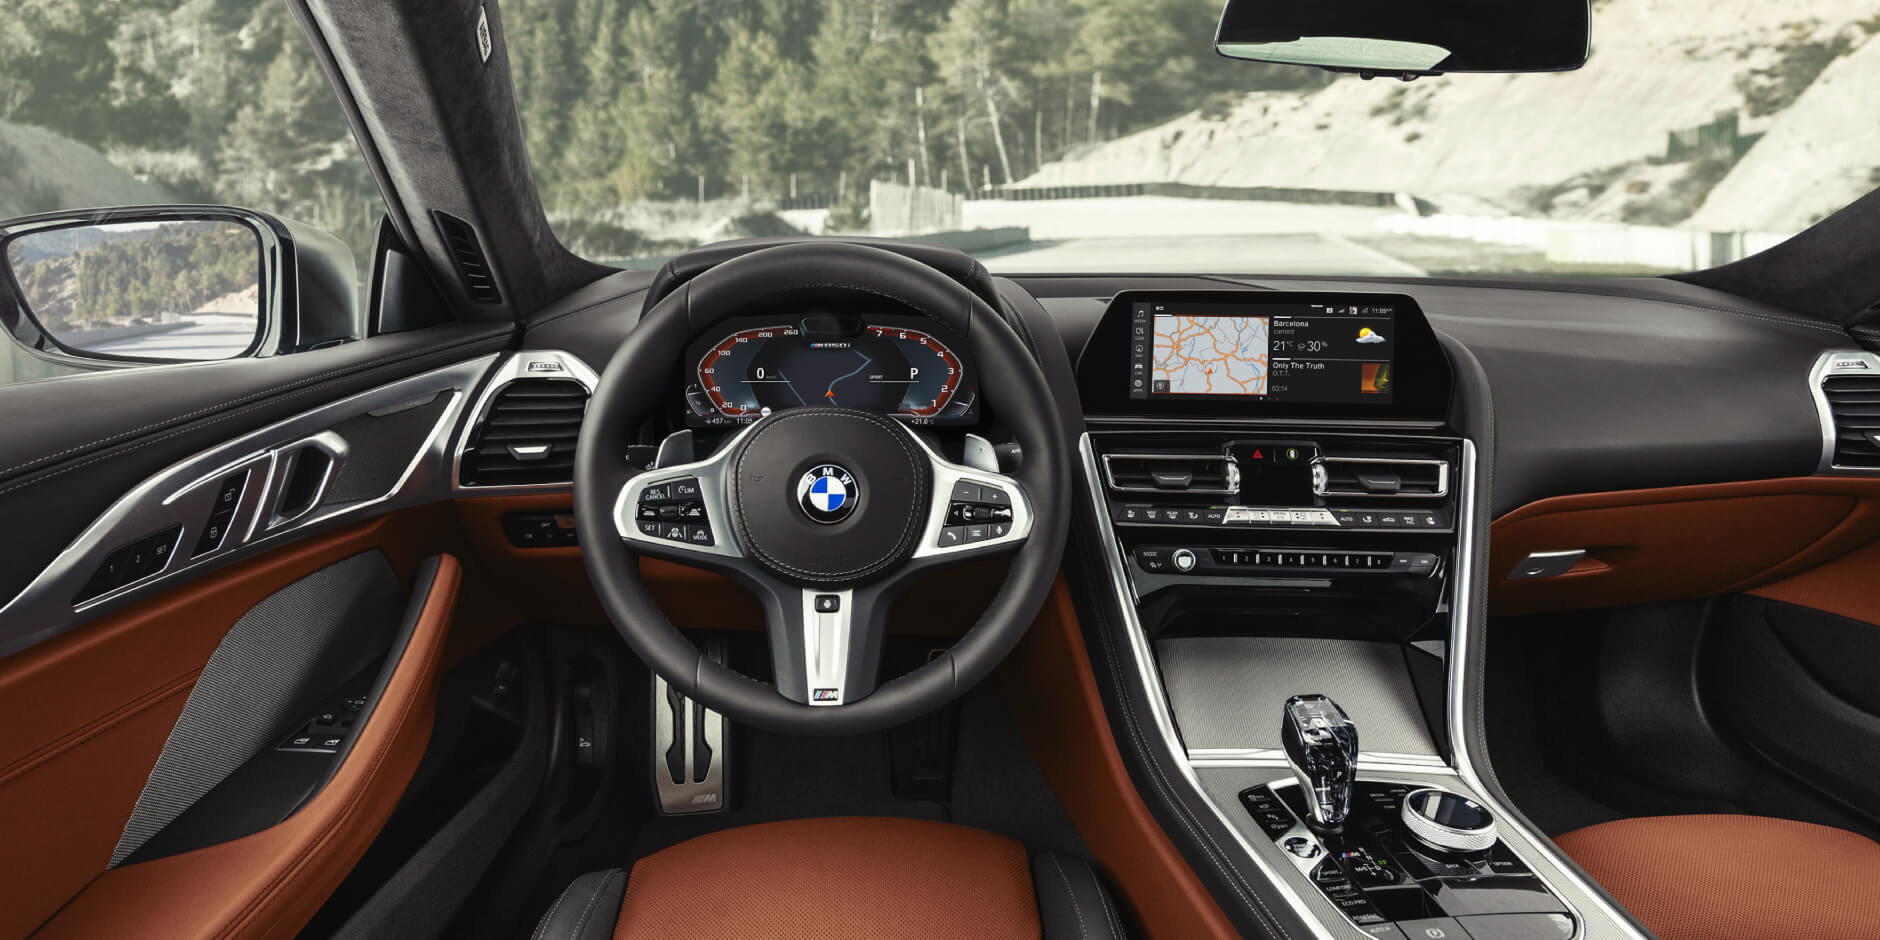 Unveiling the Thrills: What Makes BMW Sports Cars a Must-Drive Experience in the UK?